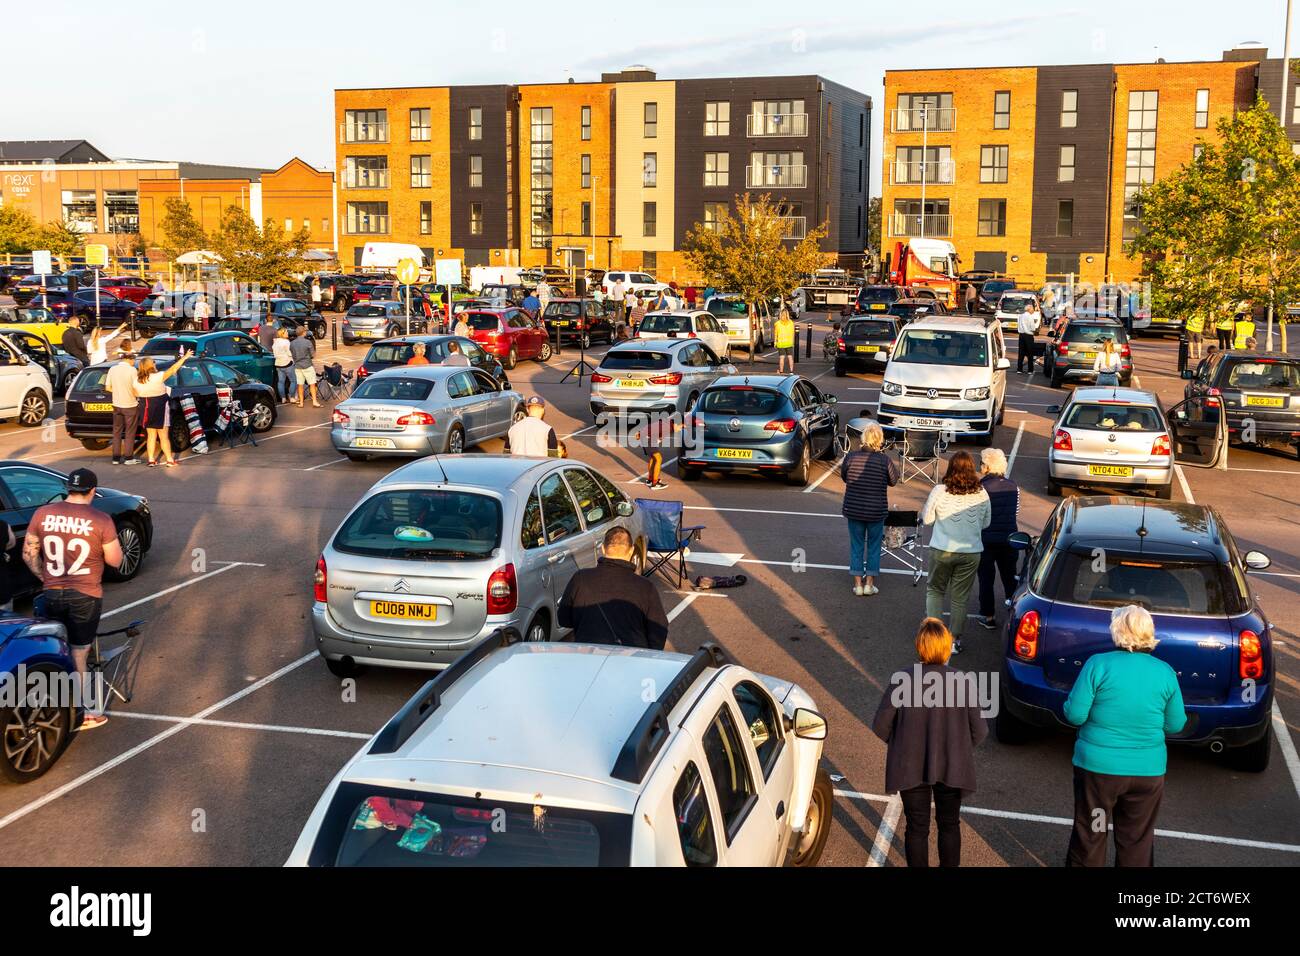 A drive in church service complying with Covid 19 restrictions on a Sunday evening in the car park of Sainsburys at Gloucester Quays, Gloucester UK Stock Photo